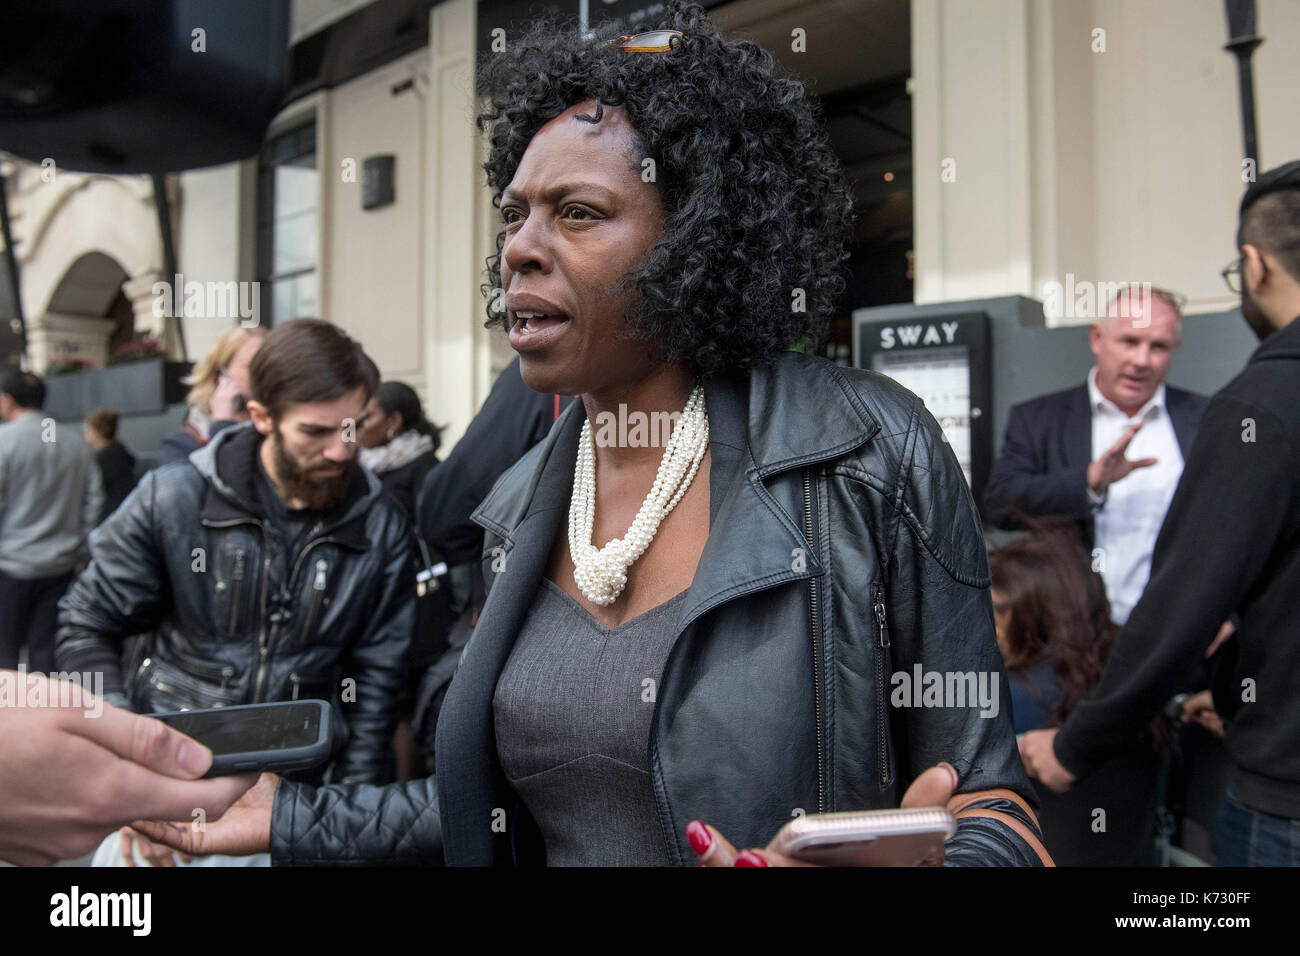 Yvette Williams, a coordinator for Justice 4 Grenfell, after the first preliminary hearing in the Grenfell Tower public inquiry, at the Connaught Rooms in central London. Stock Photo